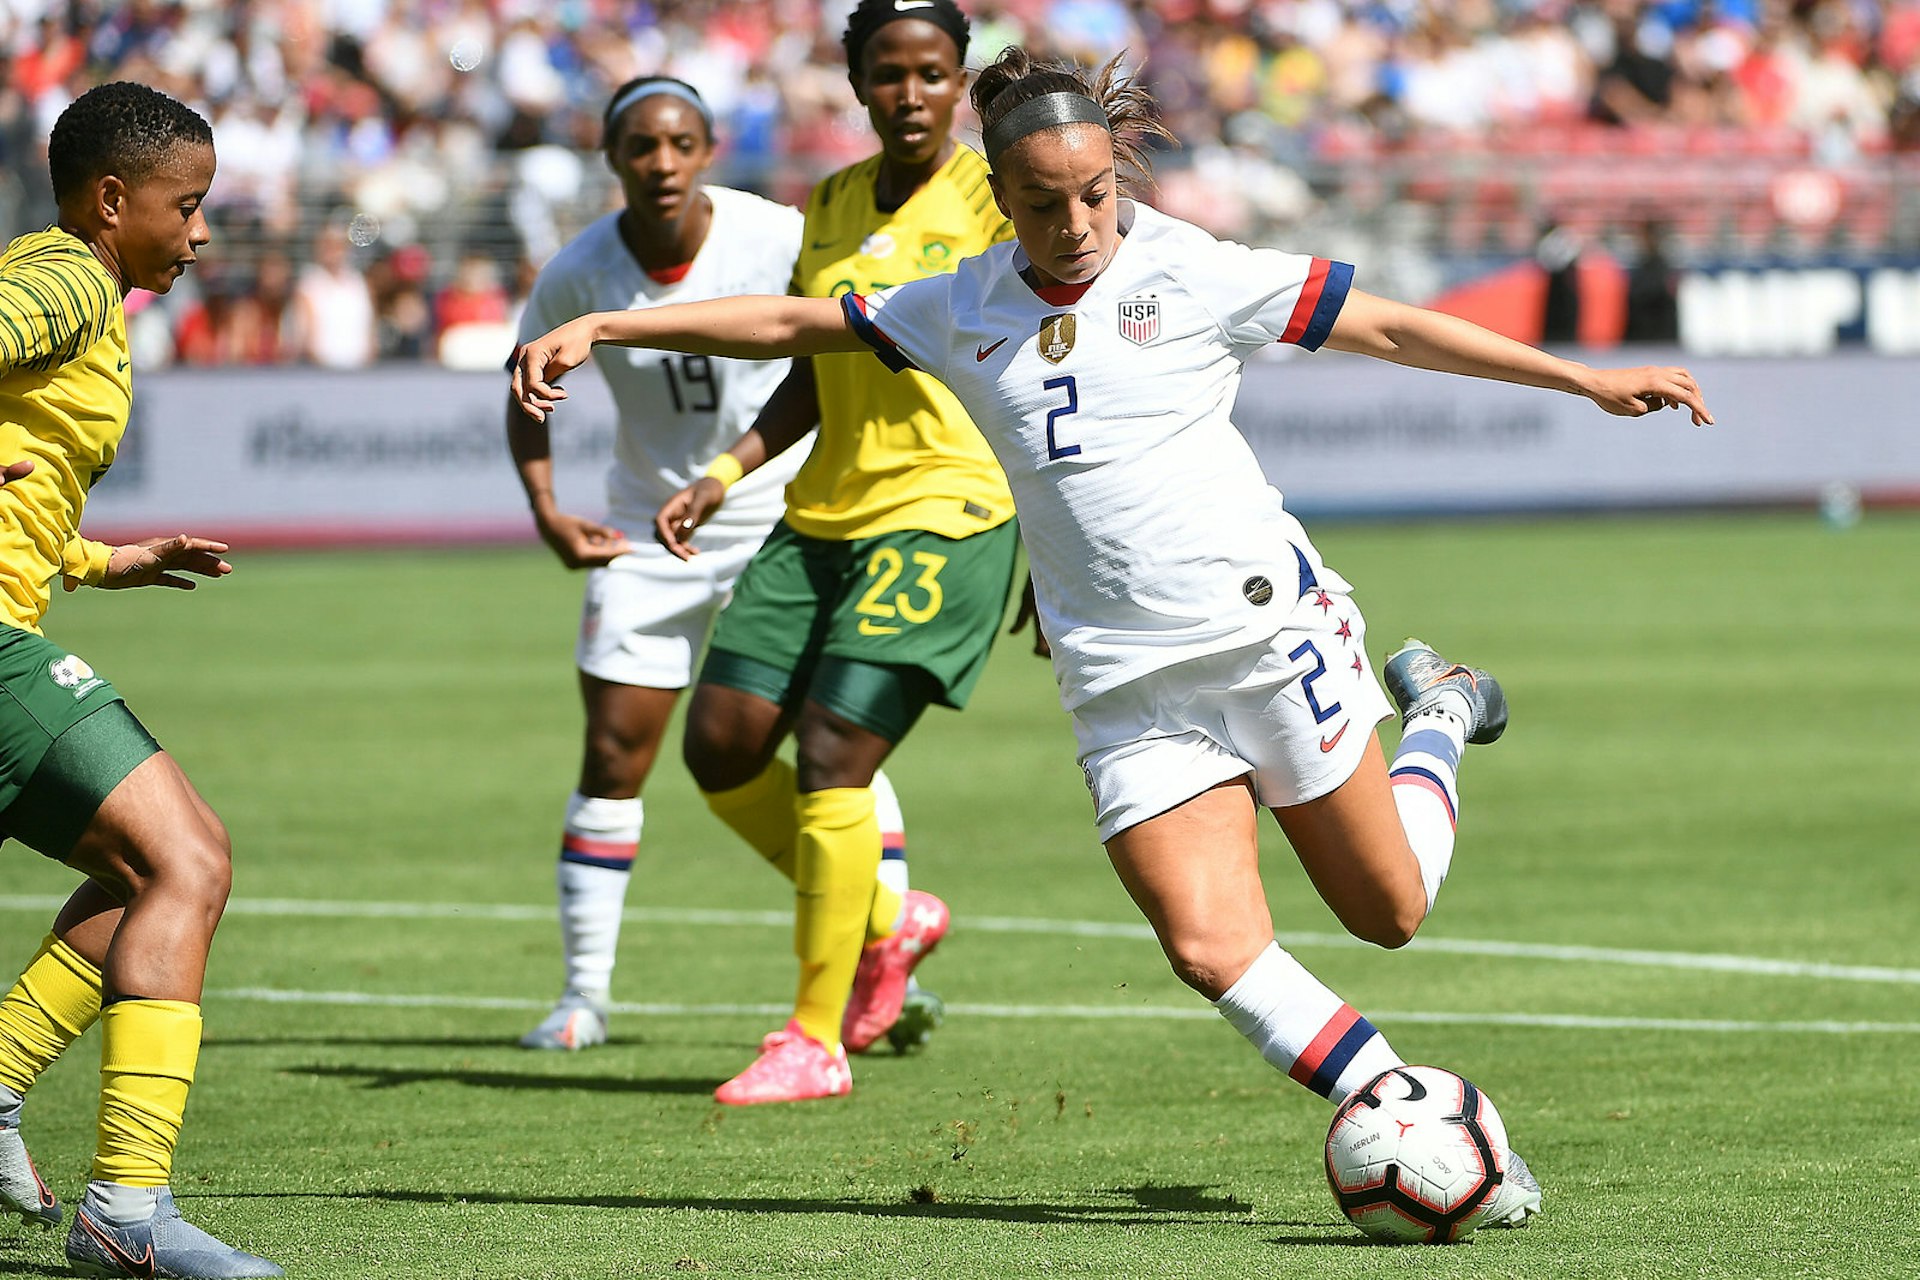 Mallory Pugh of United States takes a shot against South Africa during an international friendly football match at Levi's Stadium on May 12, 2019 in Santa Clara, California